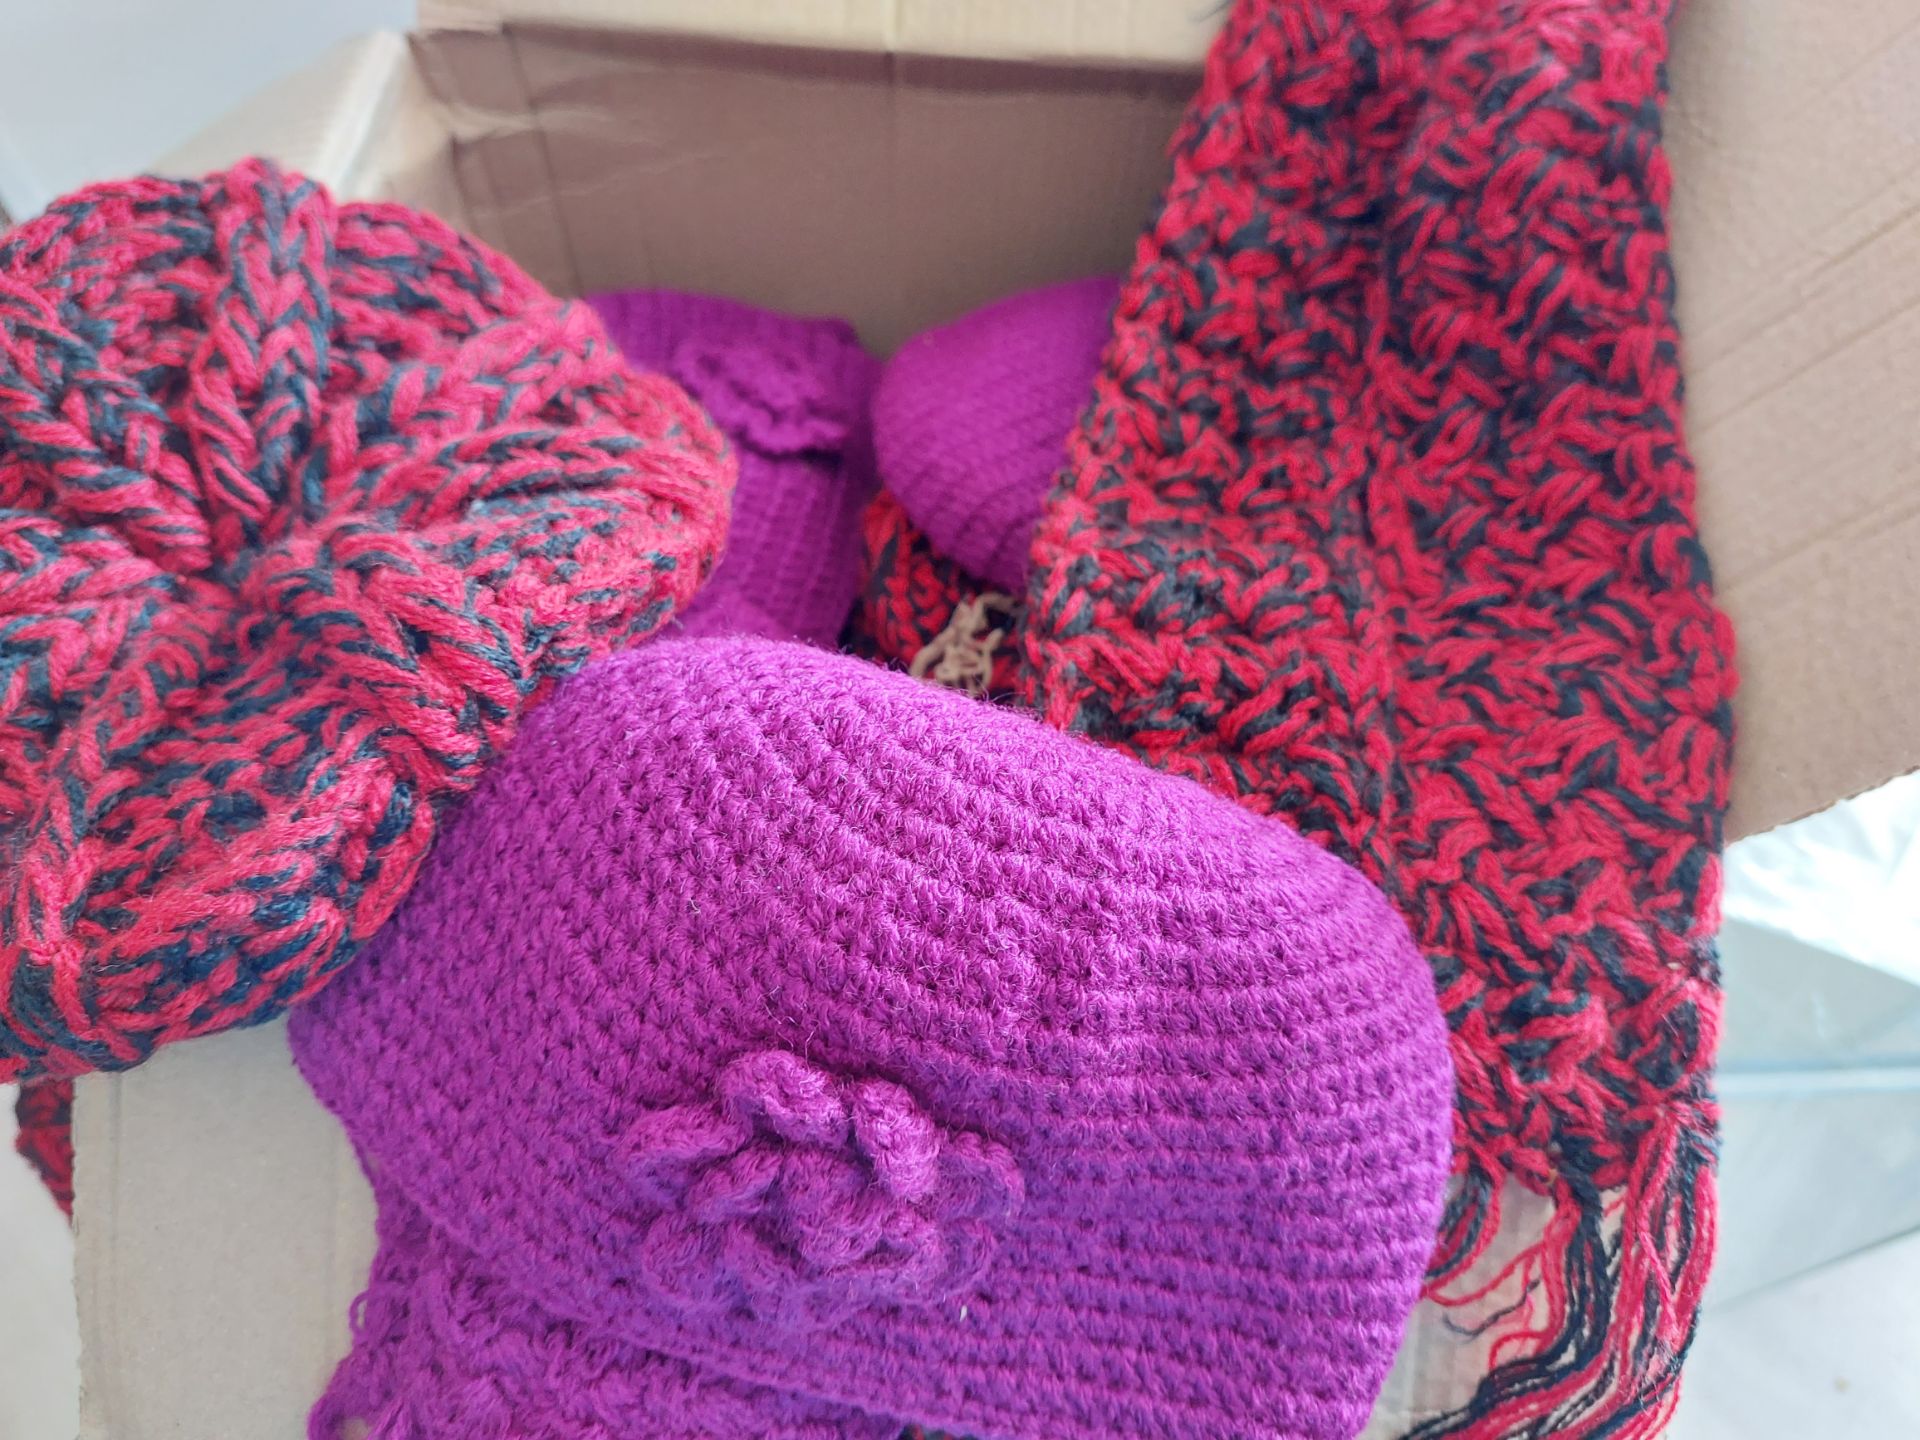 Hats, Scarves and Gloves Child Size Assorted Colours. Min 15 Items - Image 2 of 2